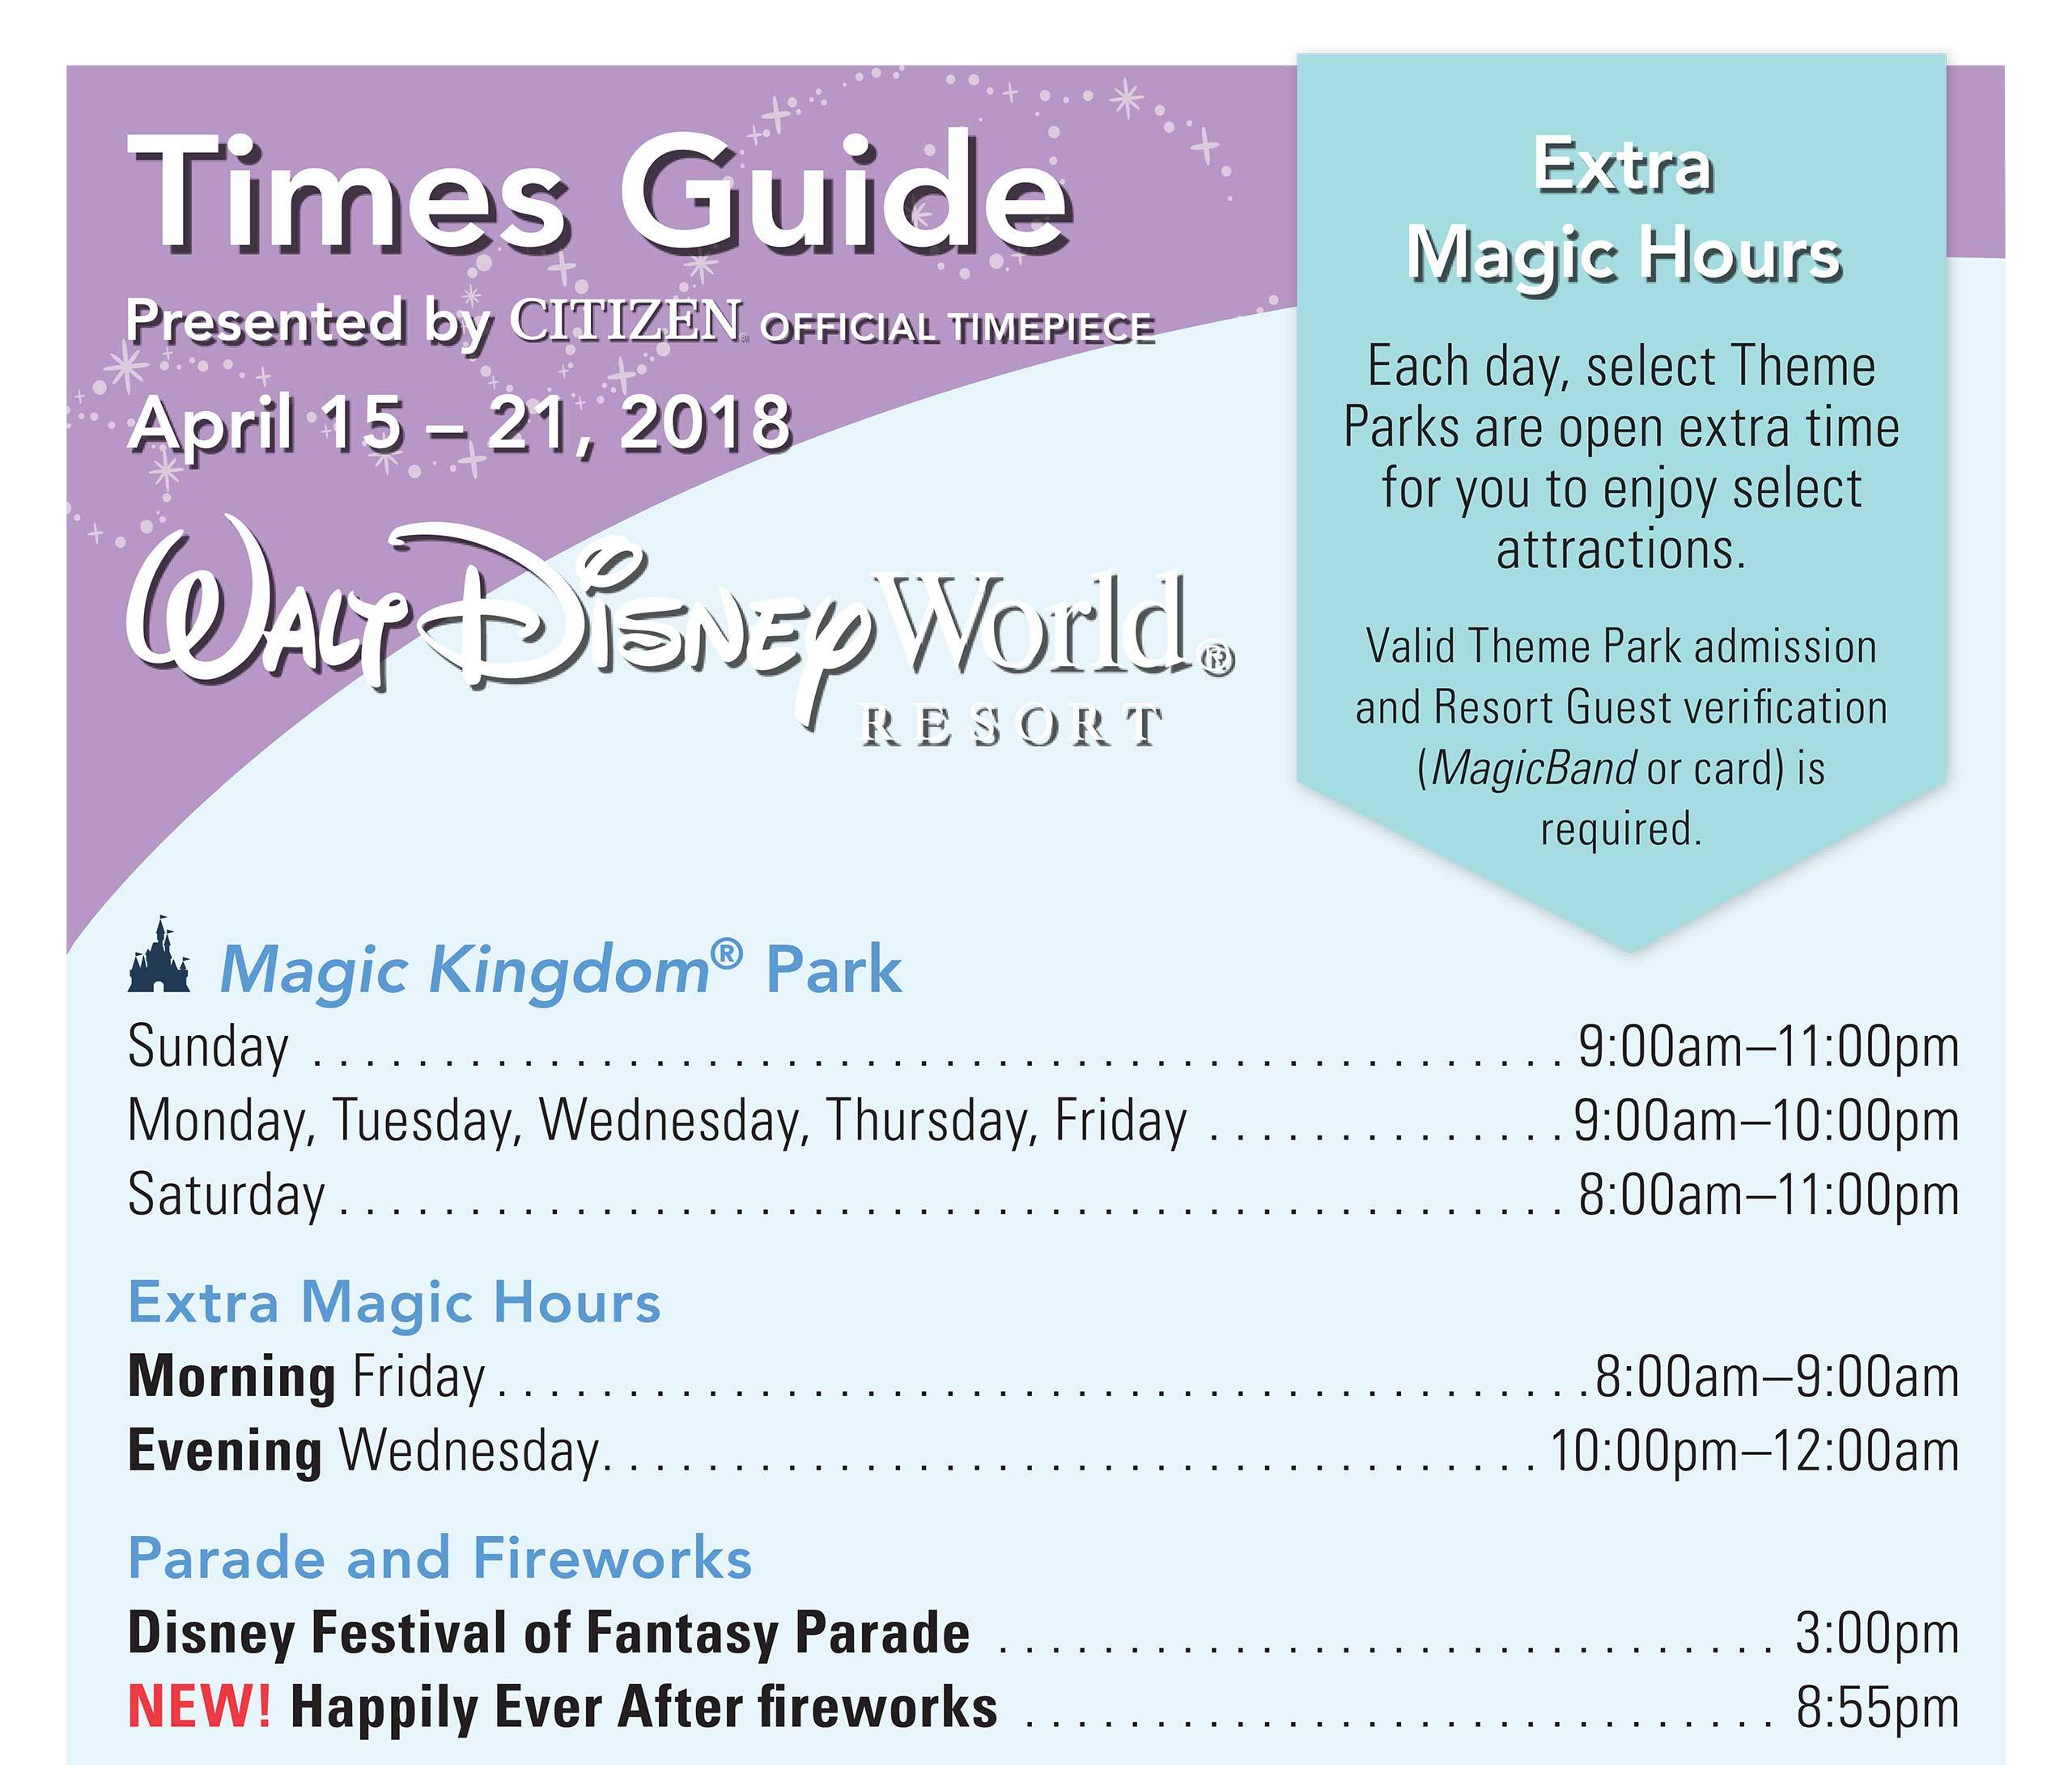 Walt Disney World Times Guides presented by Citizen